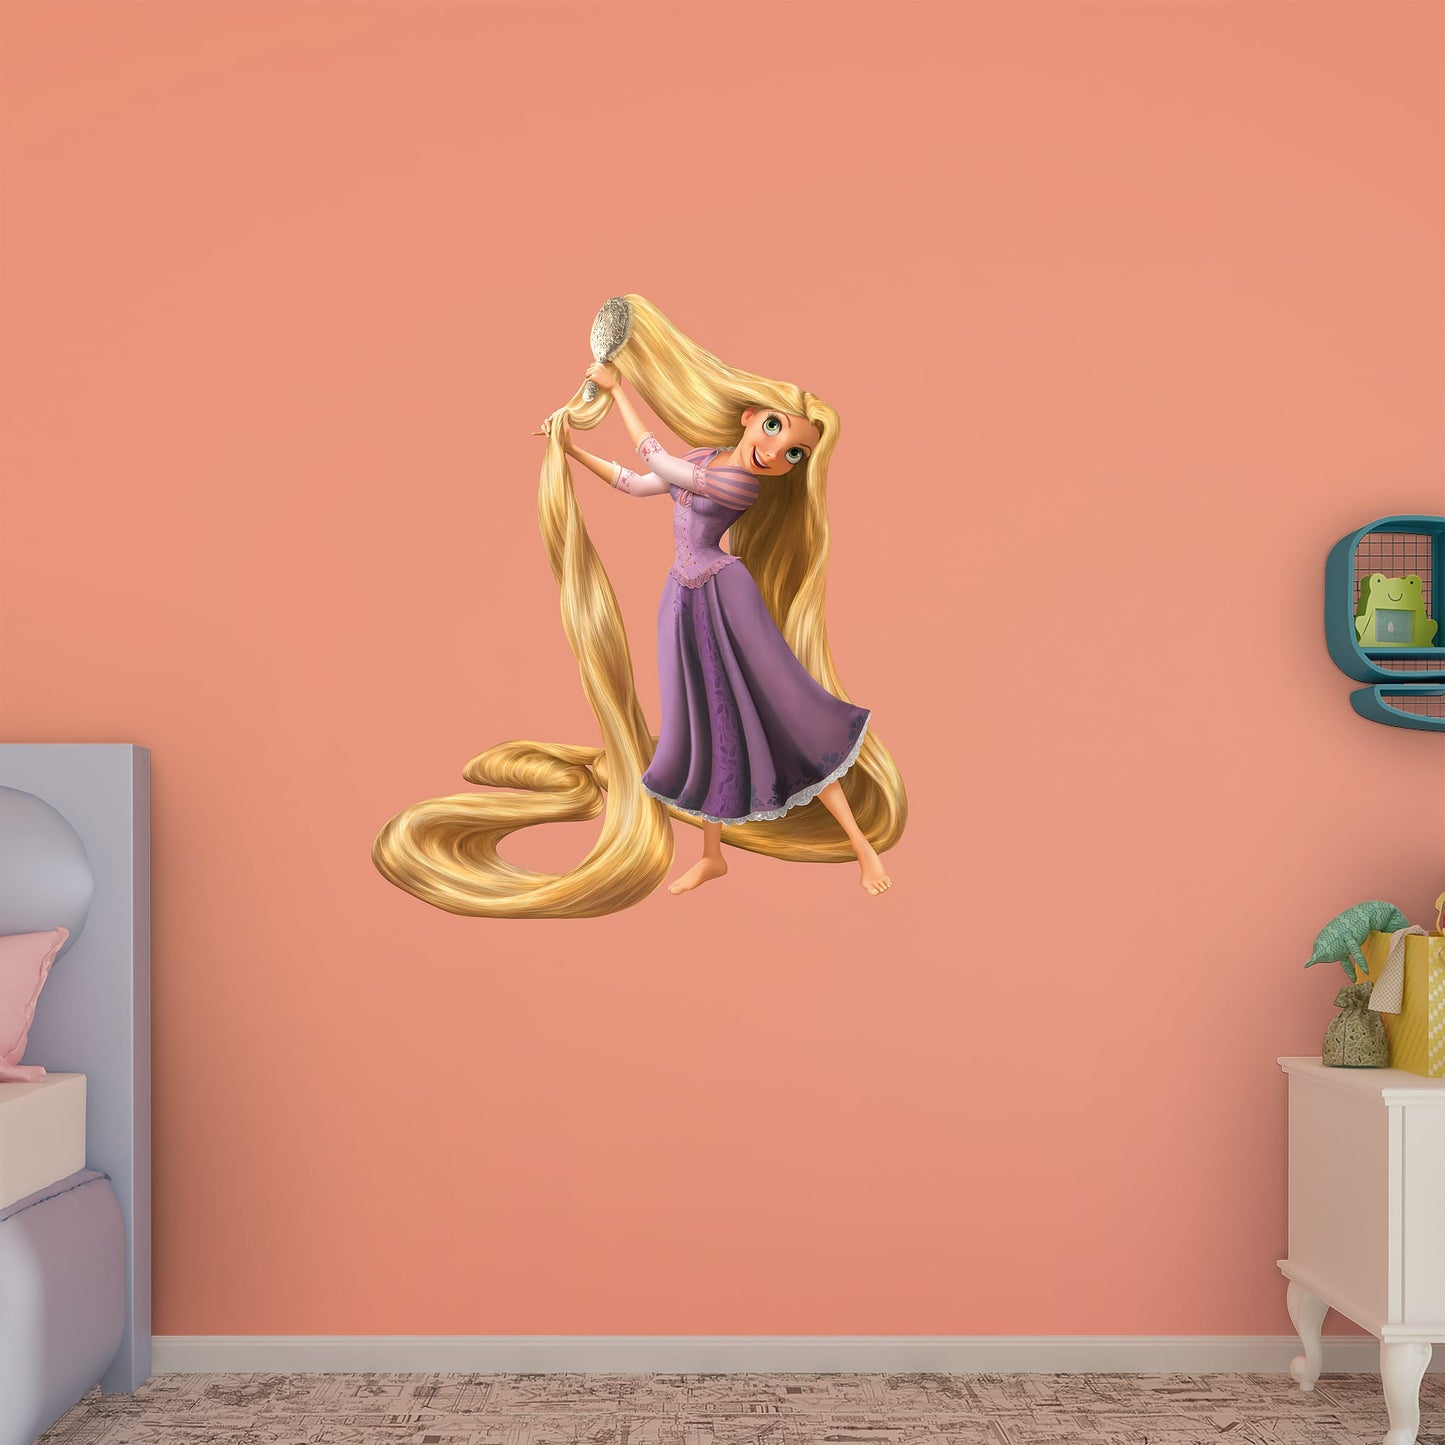 Rapunzel: Tangled - Officially Licensed Disney Removable Wall Decal